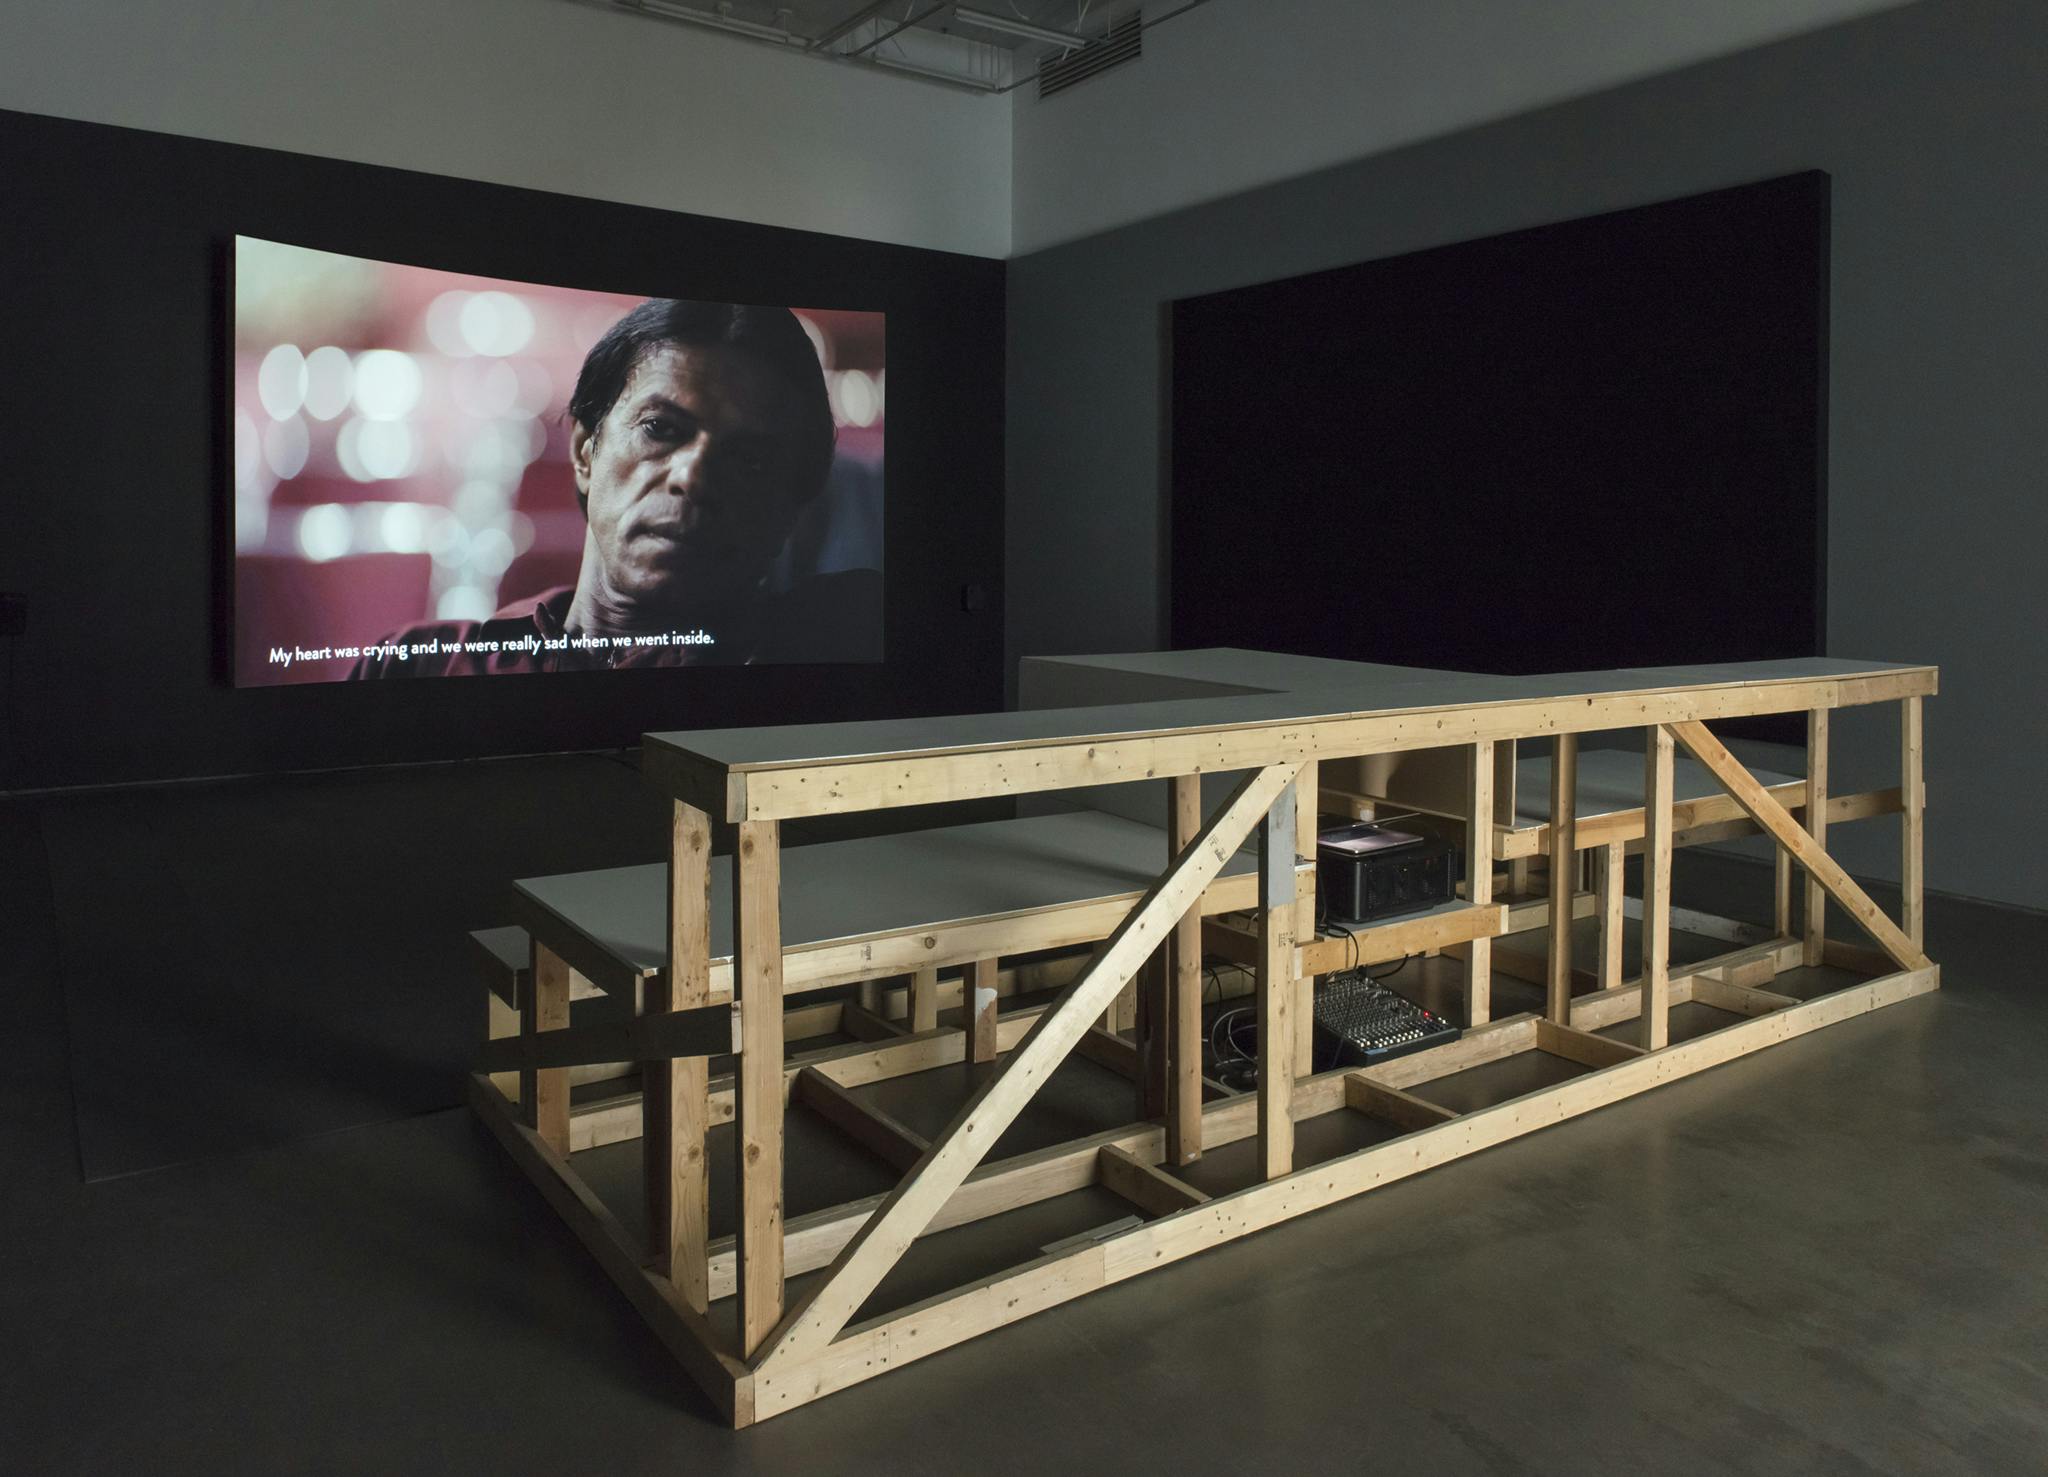 Wooden bleachers pointed towards a large projector screen in a dimly lit gallery. The screen shows a close up image of a person's face with subtitles below.